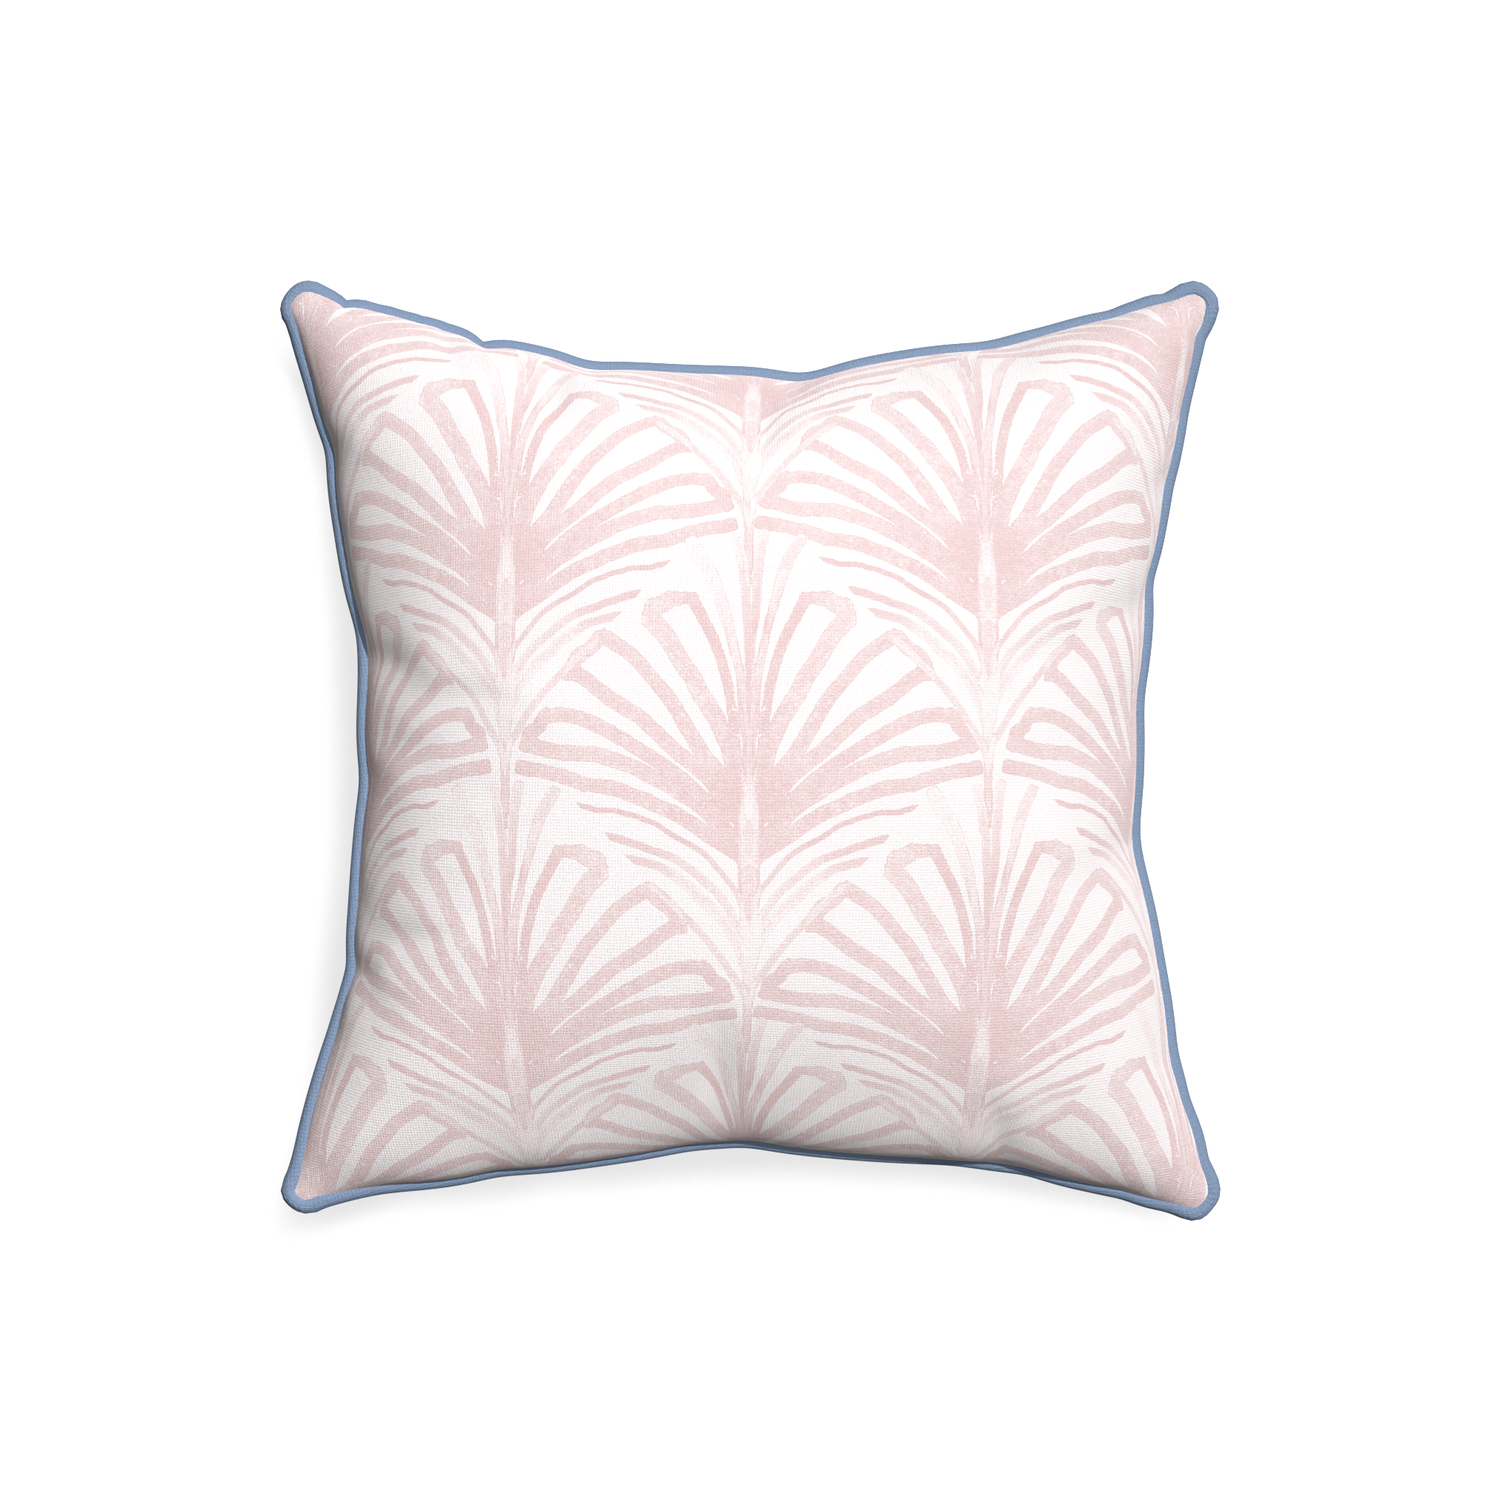 20-square suzy rose custom pillow with sky piping on white background